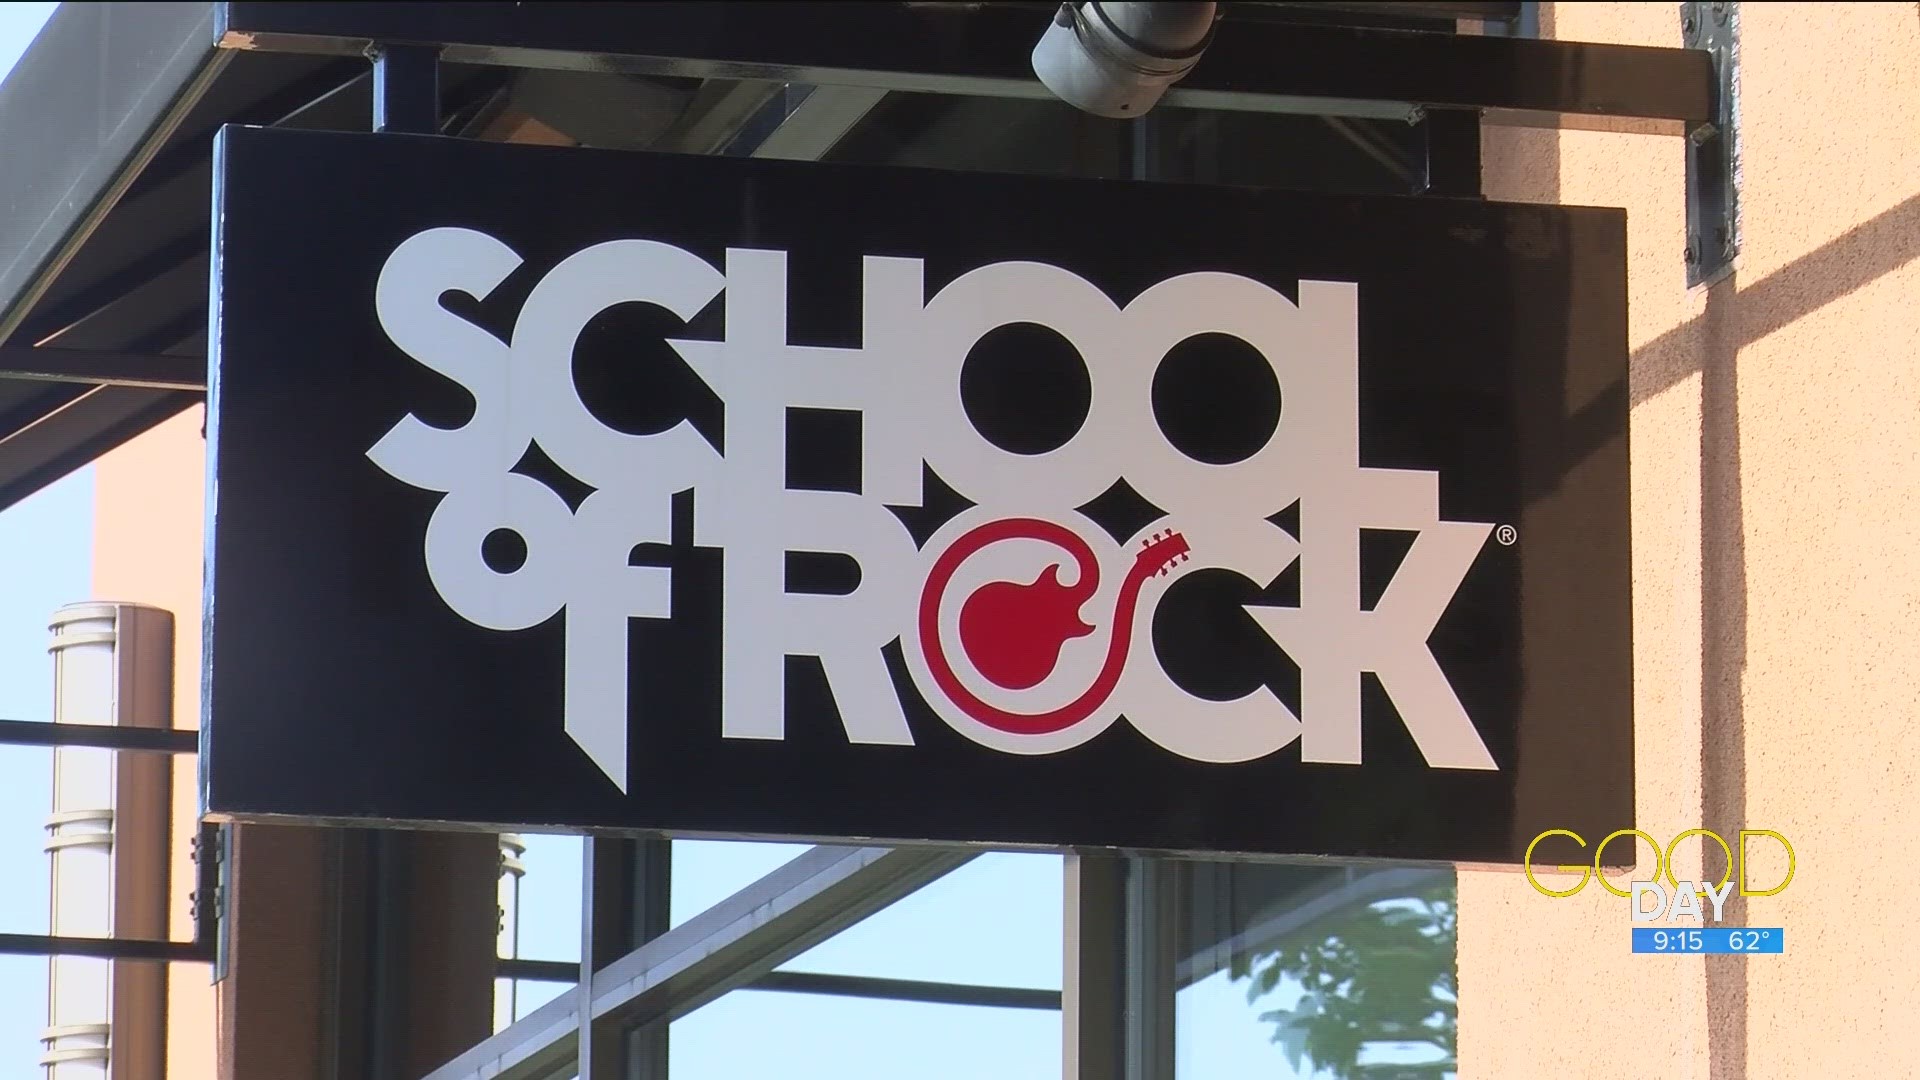 Ron Rothenbuhler talks School of Rock in Perrysburg, where you can learn a new instrument and join a band.